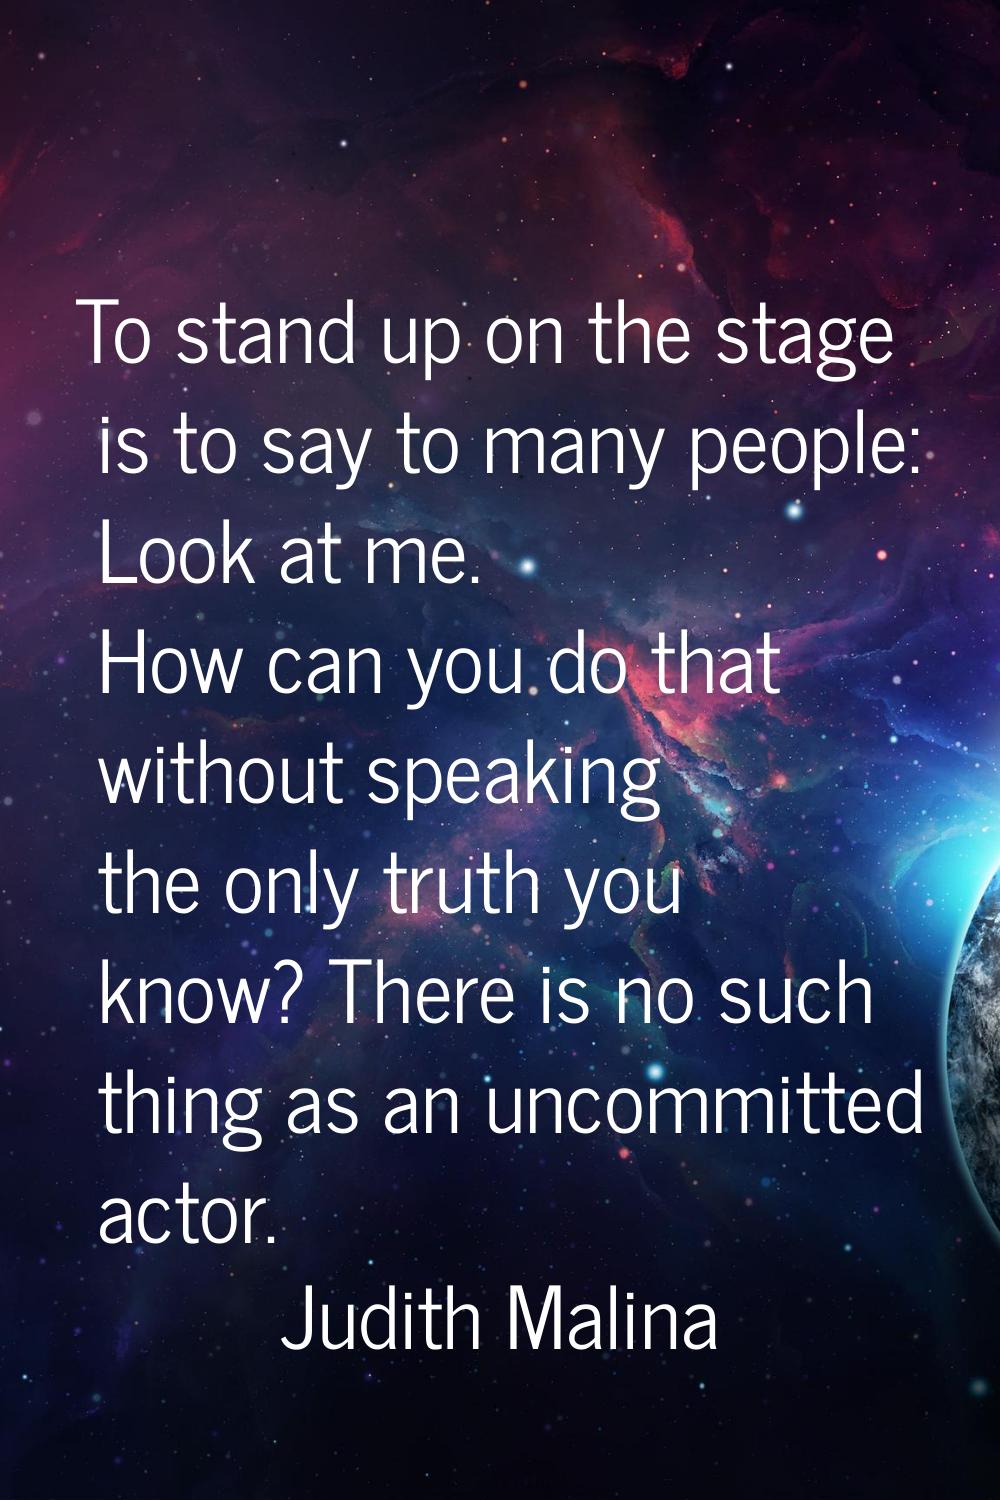 To stand up on the stage is to say to many people: Look at me. How can you do that without speaking